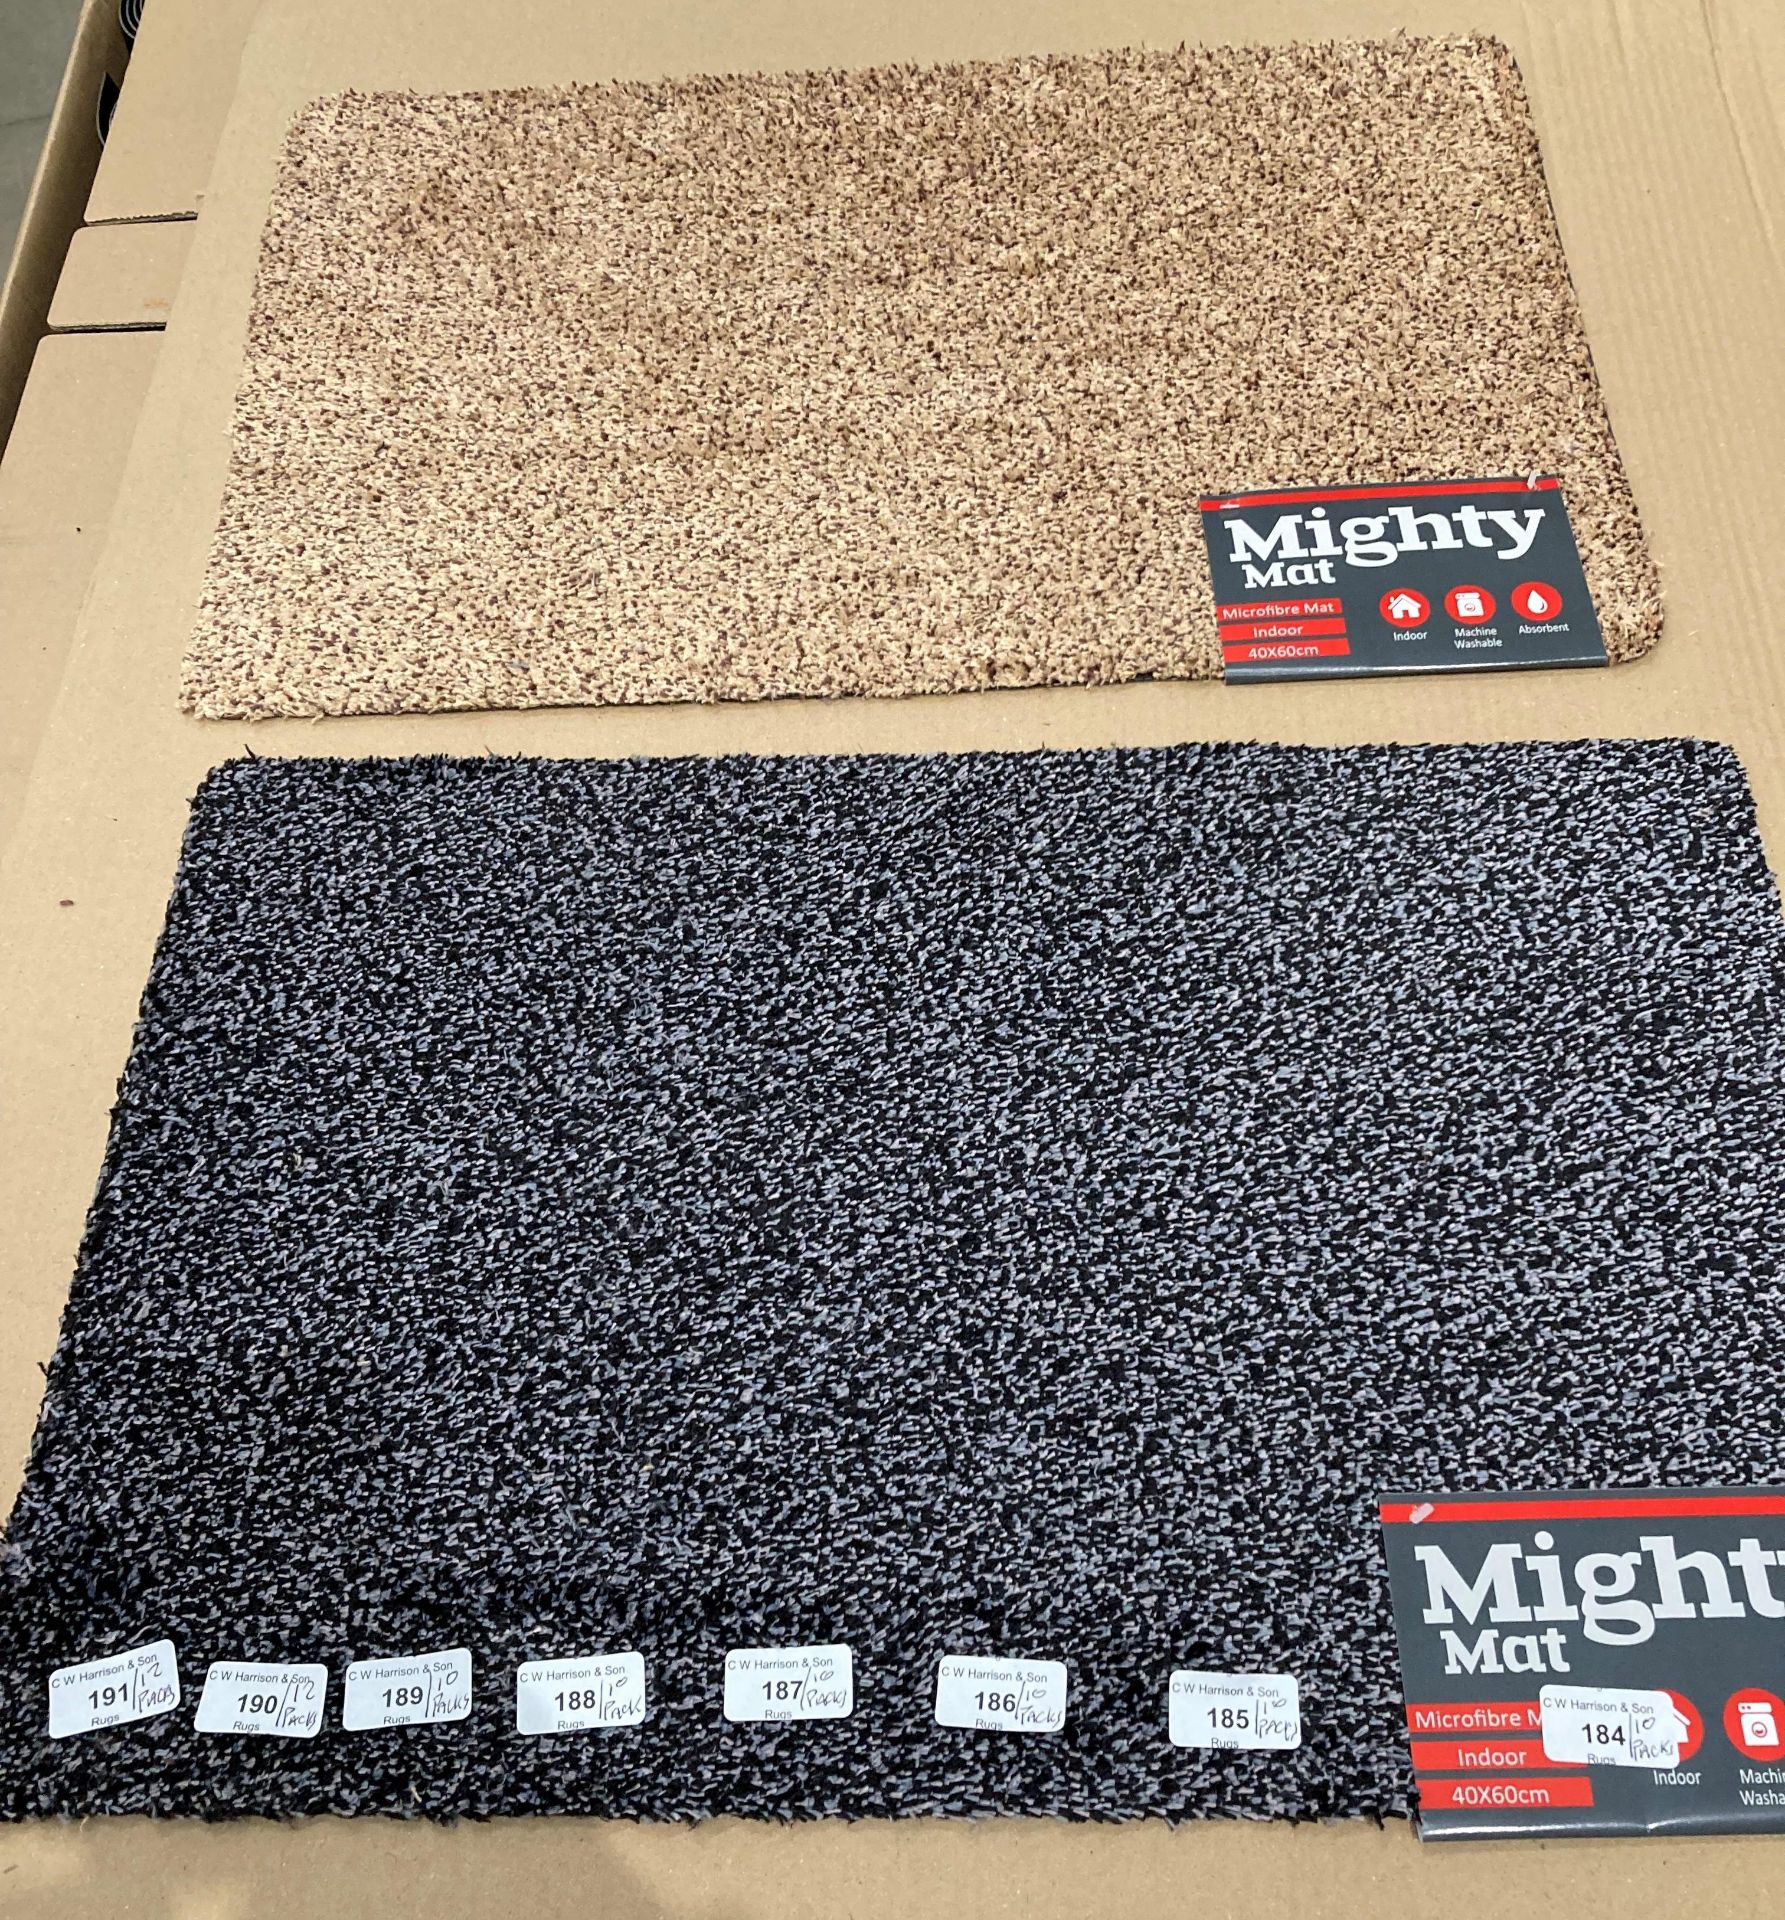 60 x Microfibre 40cm x 60cm mats - 10 x packs of 6 (3 grey and 3 brown per pack) (F&G3) *Please